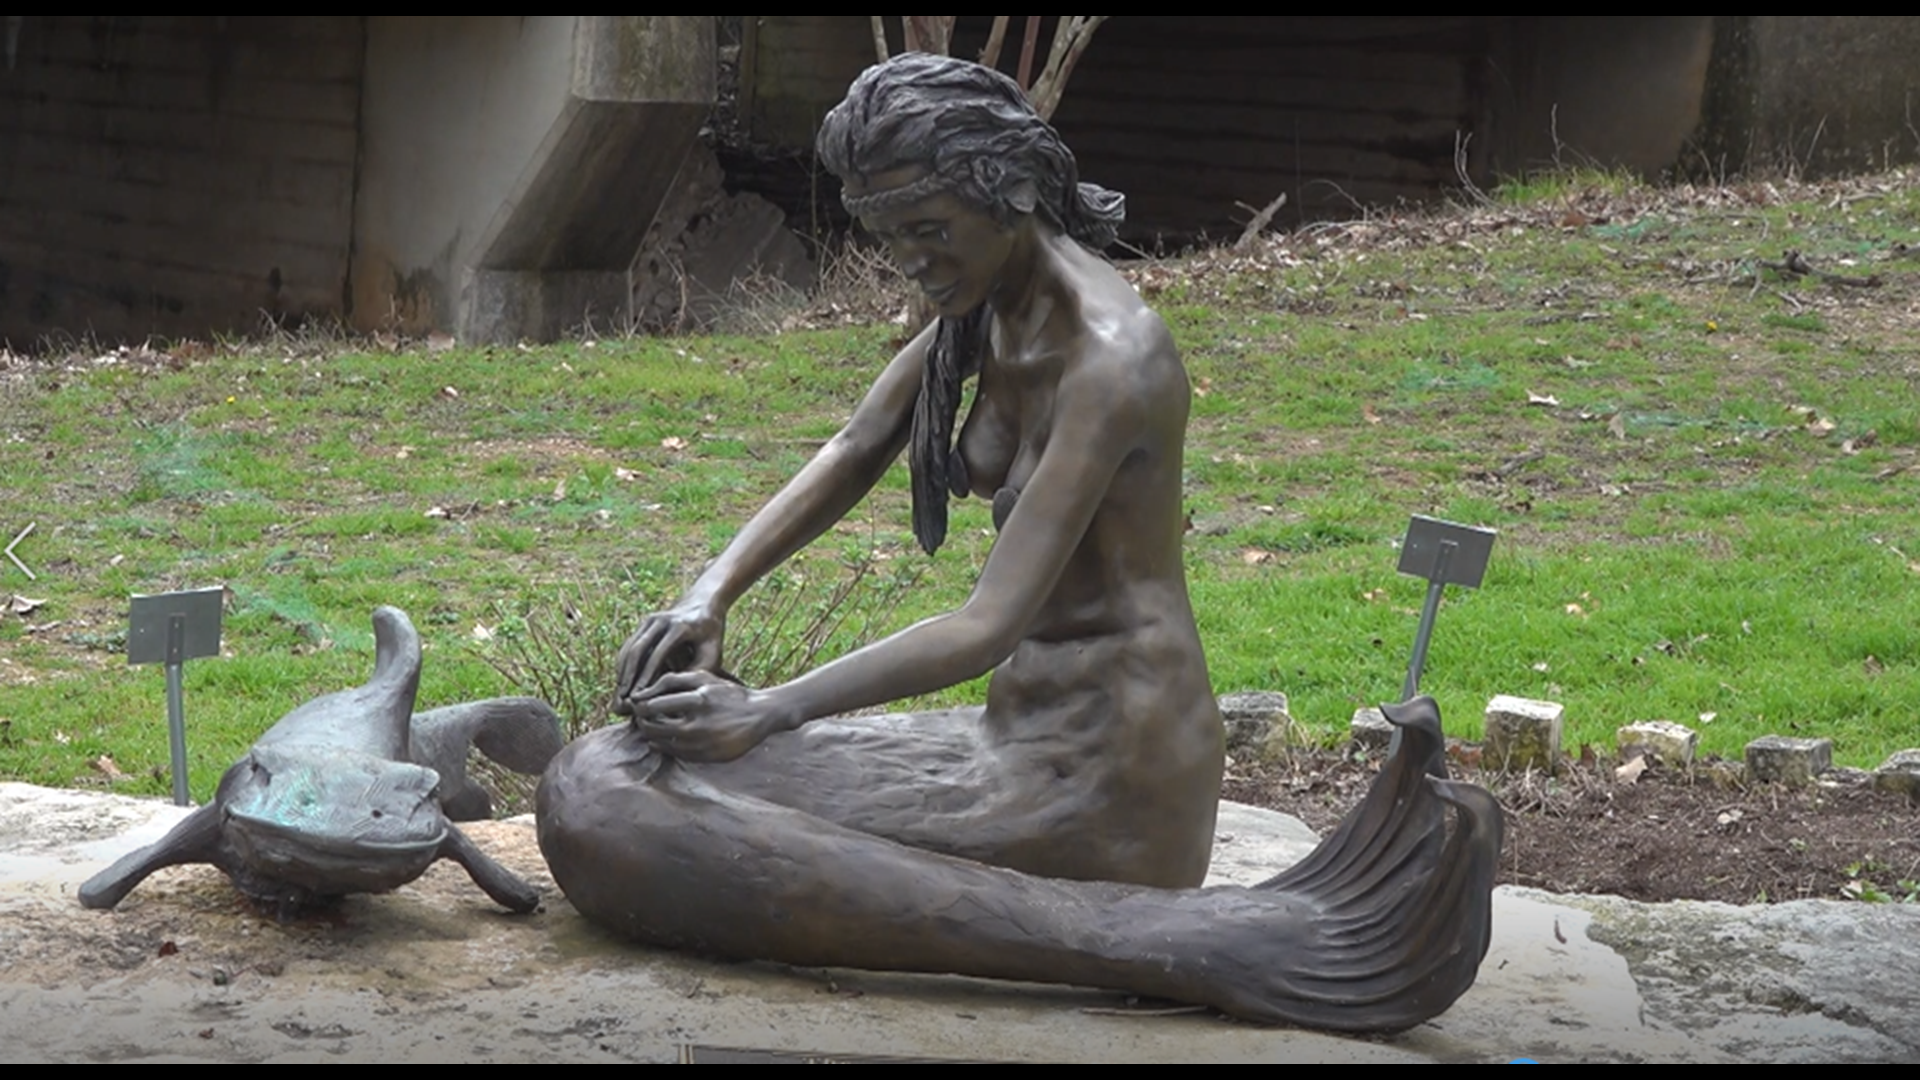 Sculptor Troy Kelly crafted the statute of Sirena the Indian Mermaid back in 1986. Today, it's an icon in the Salado community.